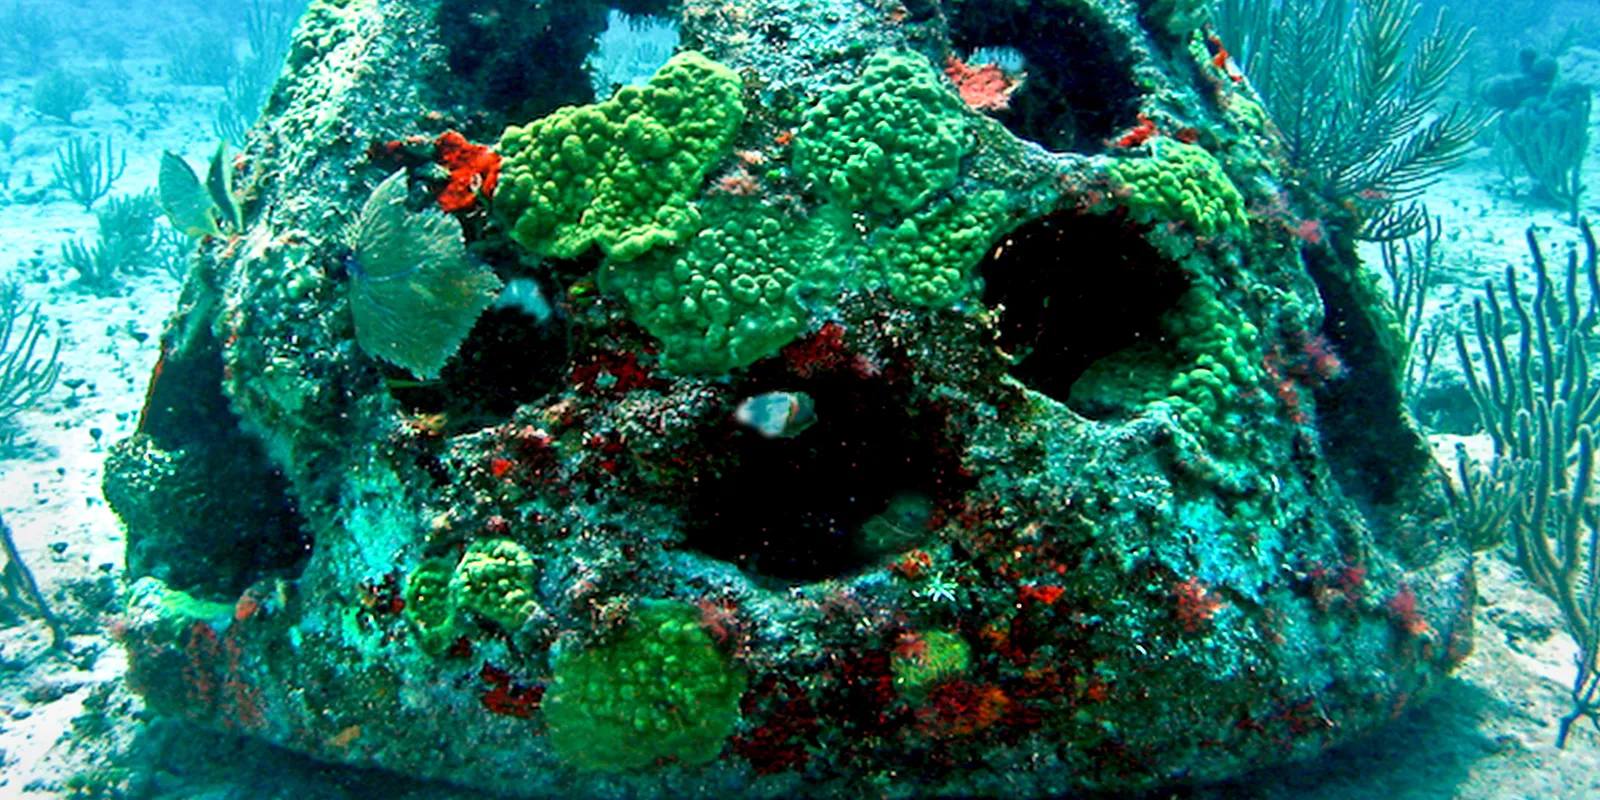 A reef ball underwater covered in moss and coral.